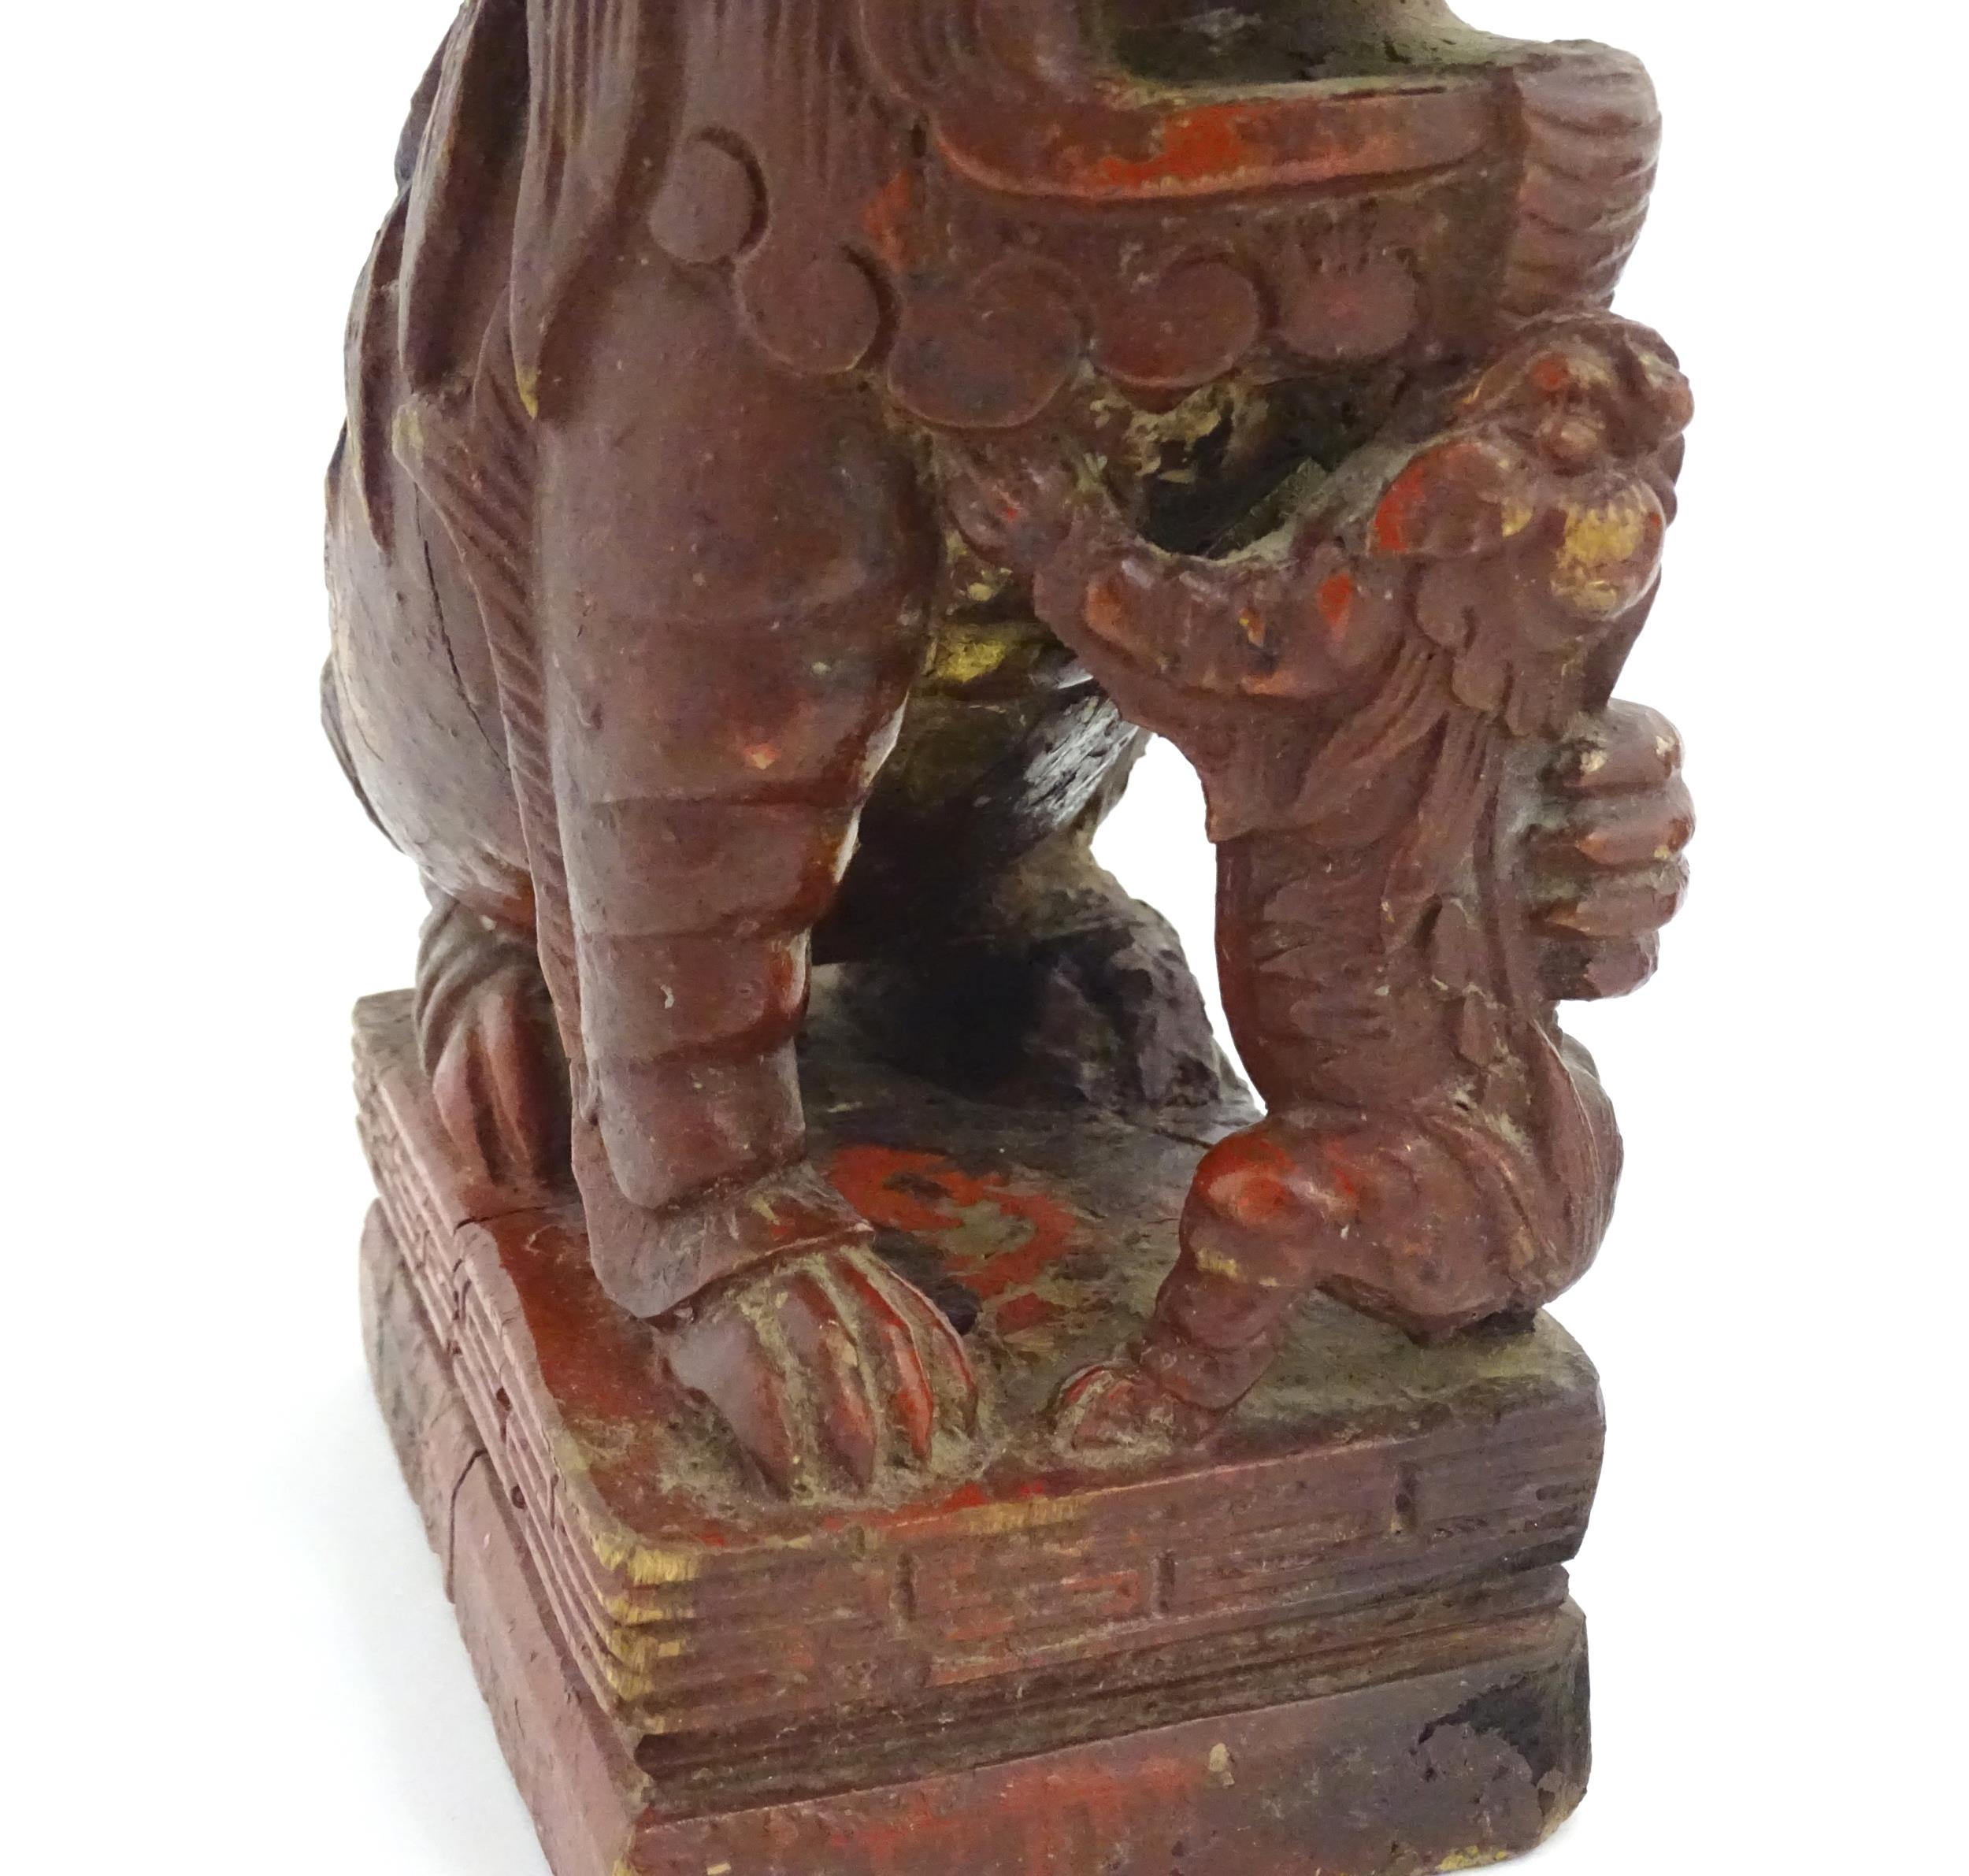 Two Chinese carved wooden foo dogs / guardian lions, one with a cub, the other with a ball, with - Image 8 of 9